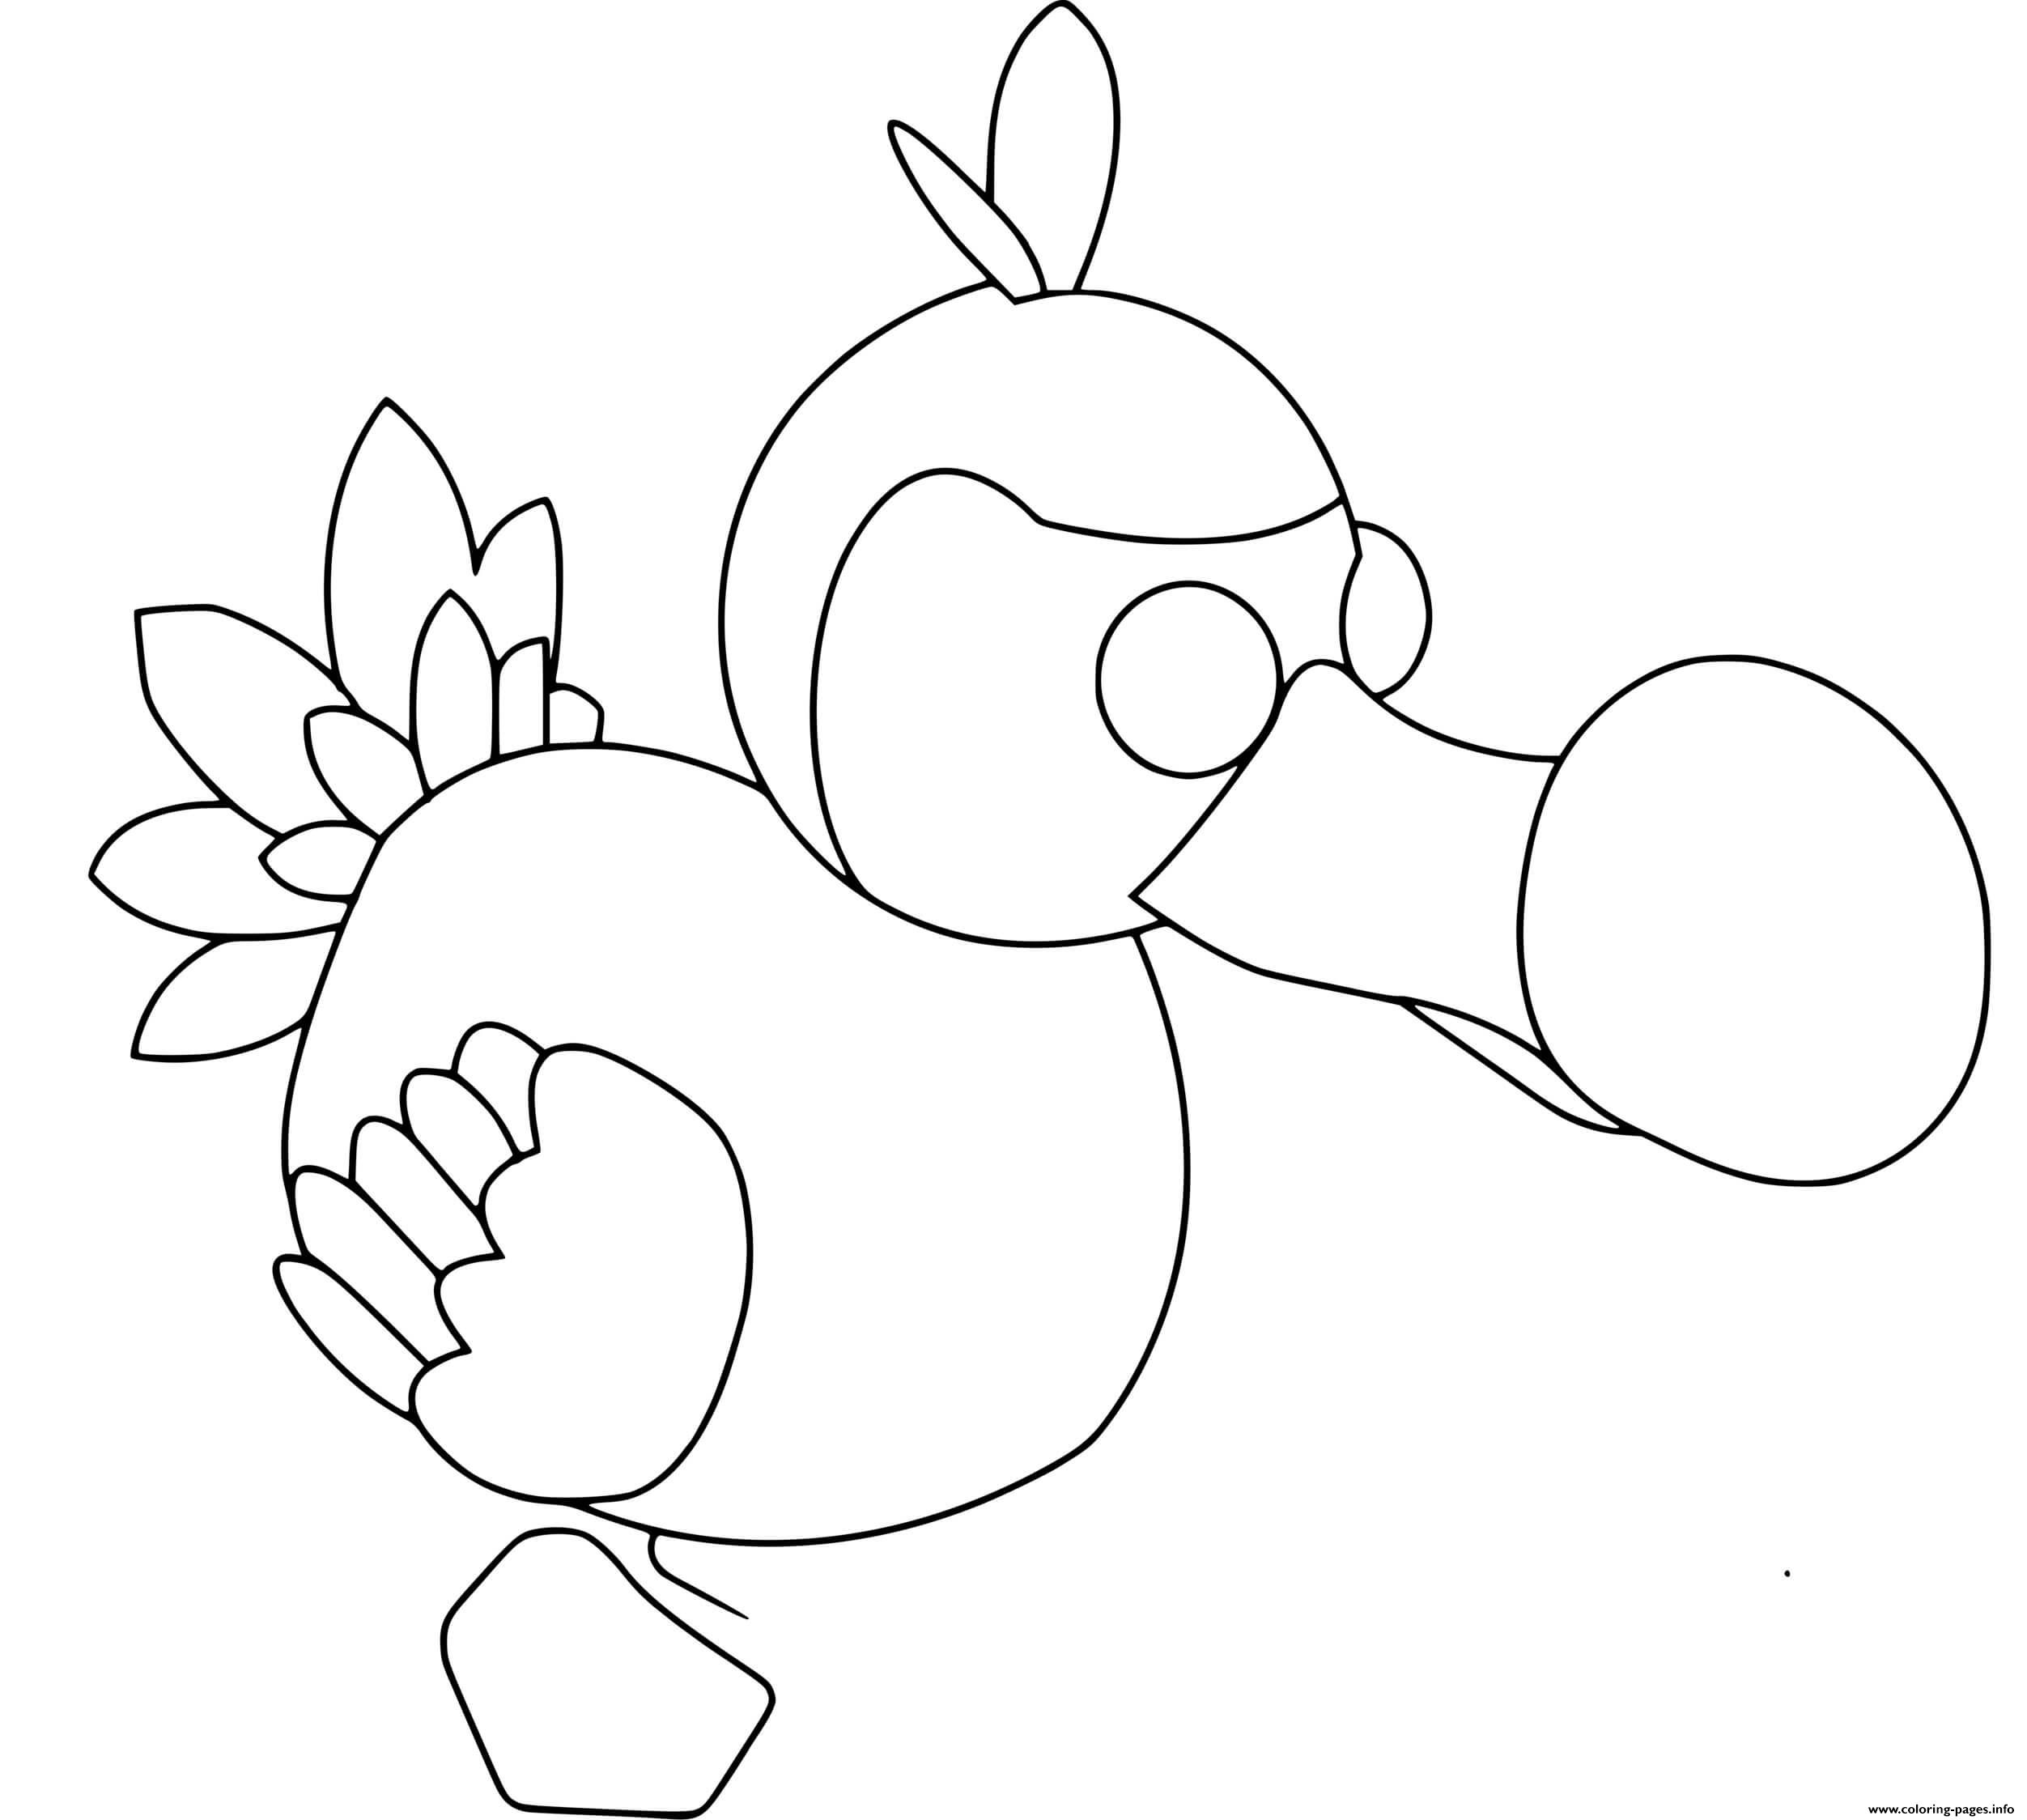 Roblox Adopt Me Dodo Coloring Pages Printable - roblox coloring pages adopt me